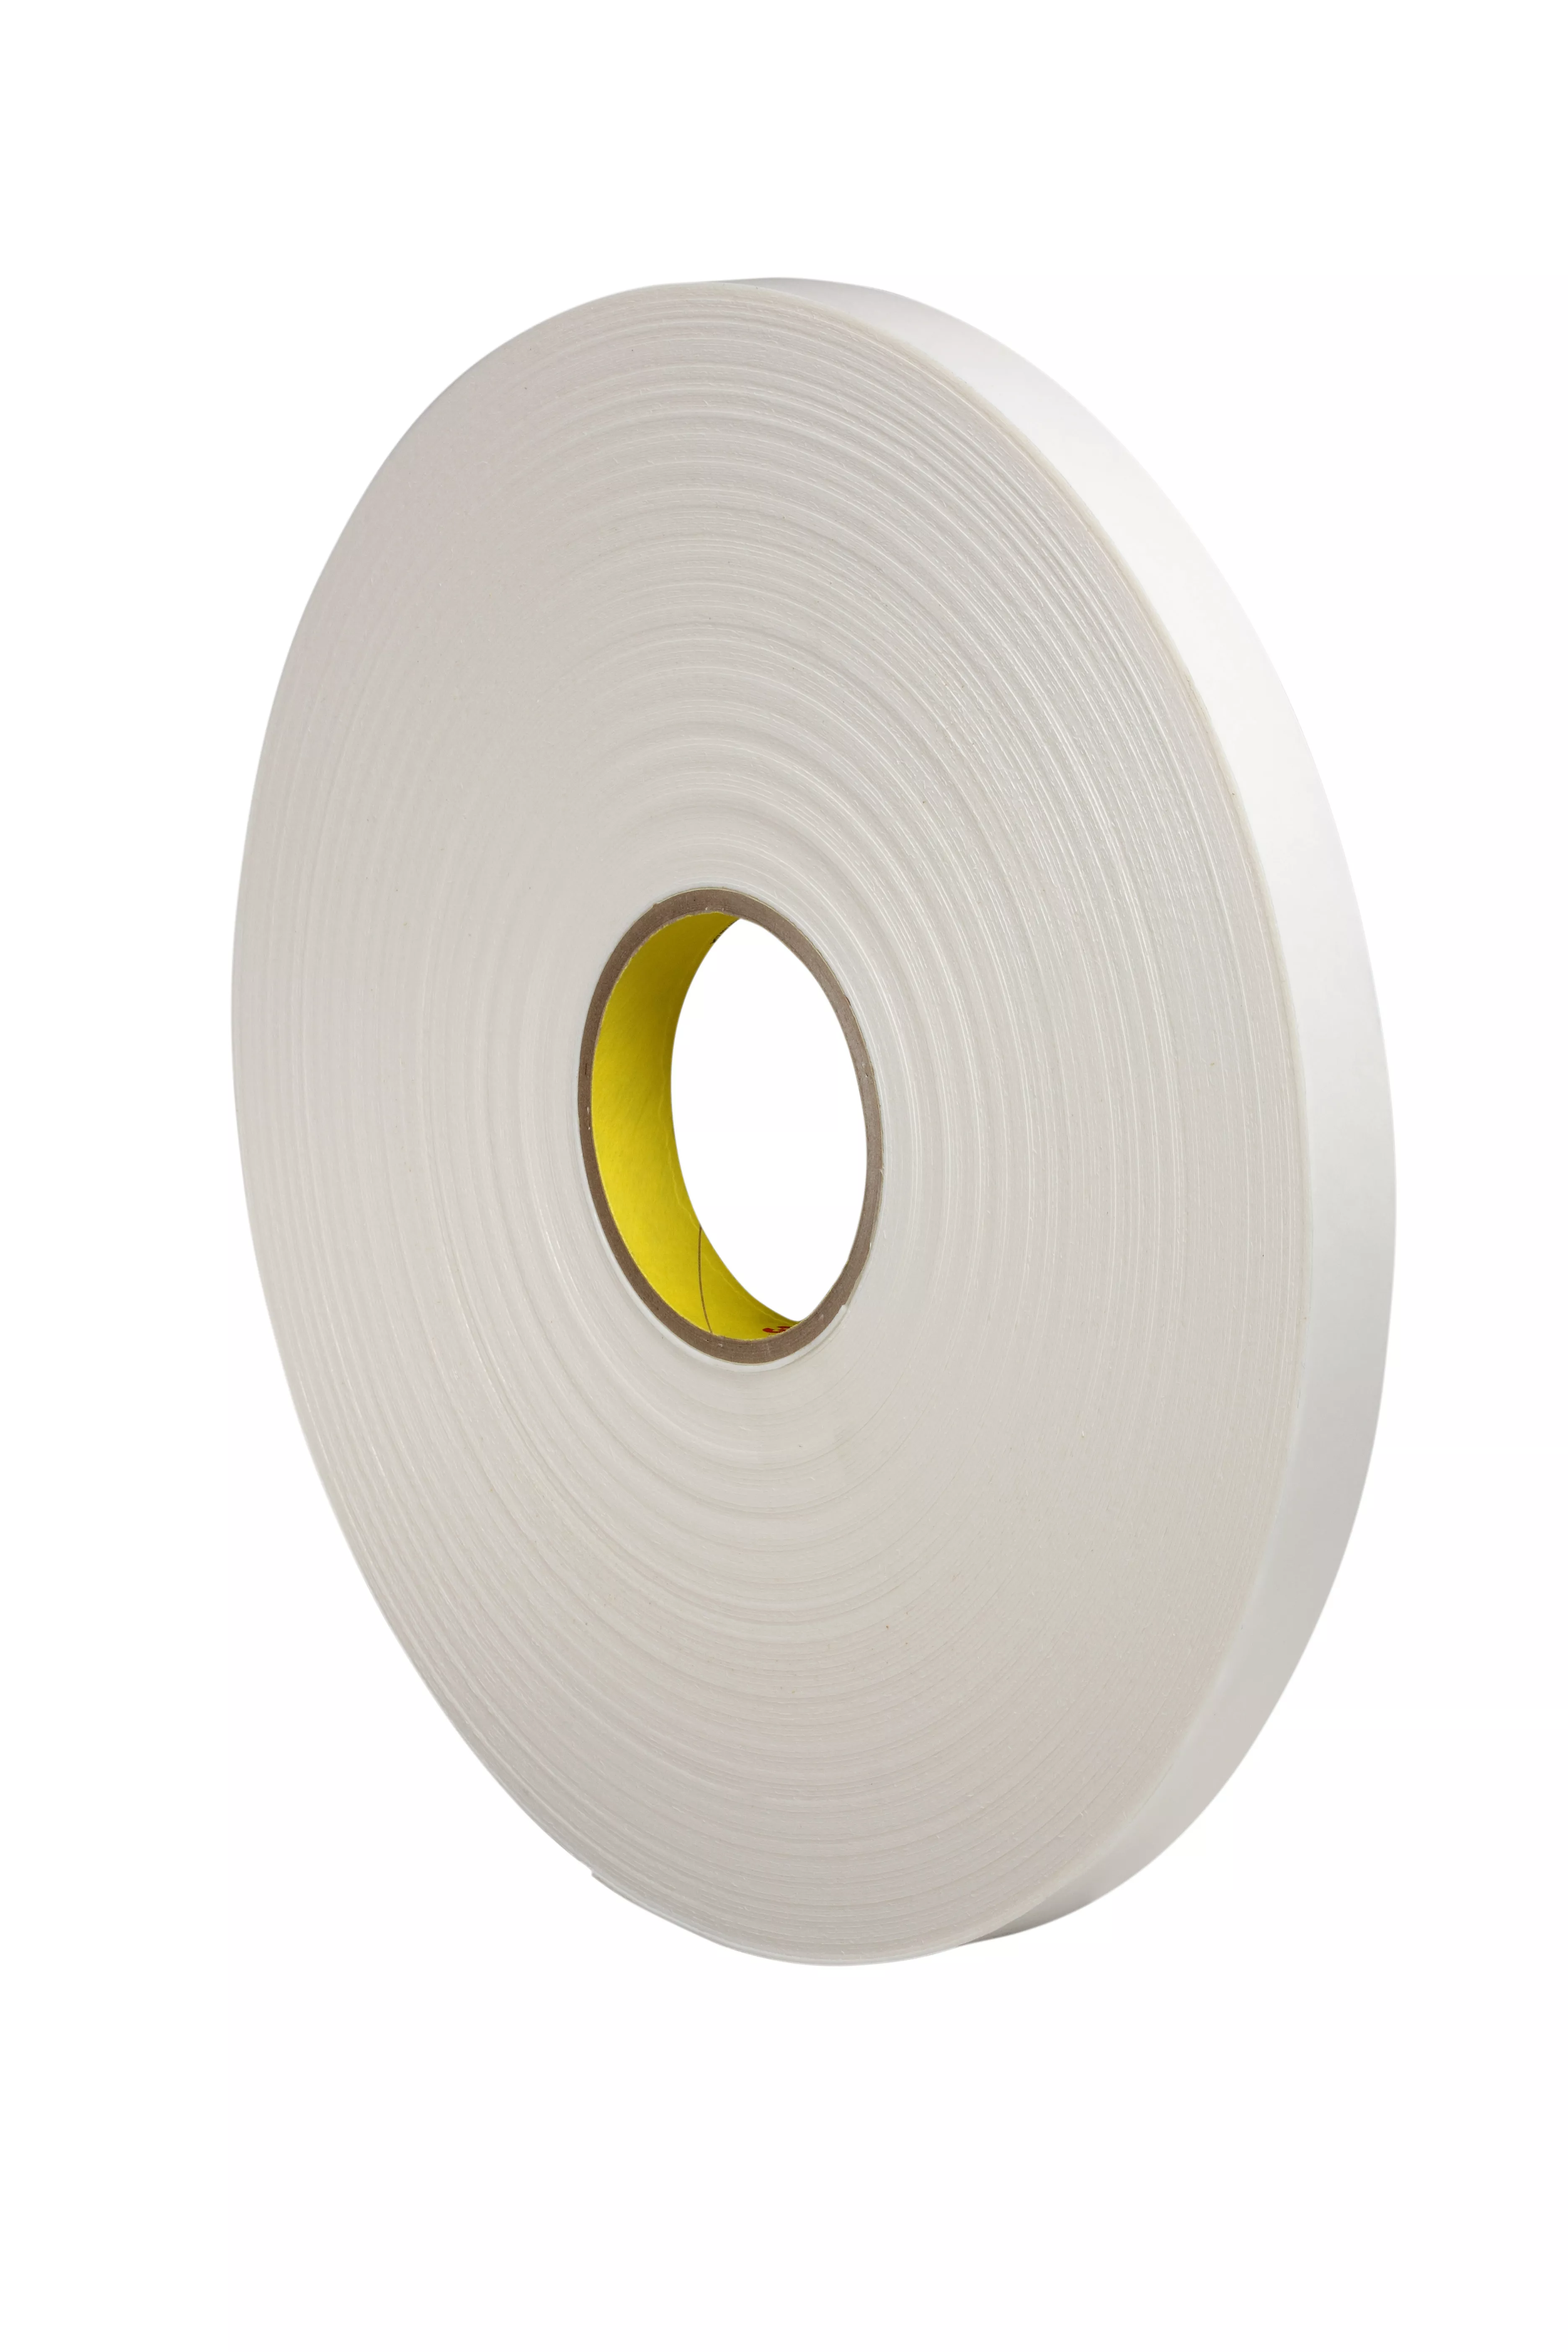 3M™ Urethane Foam Tape 4104, Natural, 1 in x 18 yd, 250 mil, 9 Roll/Case